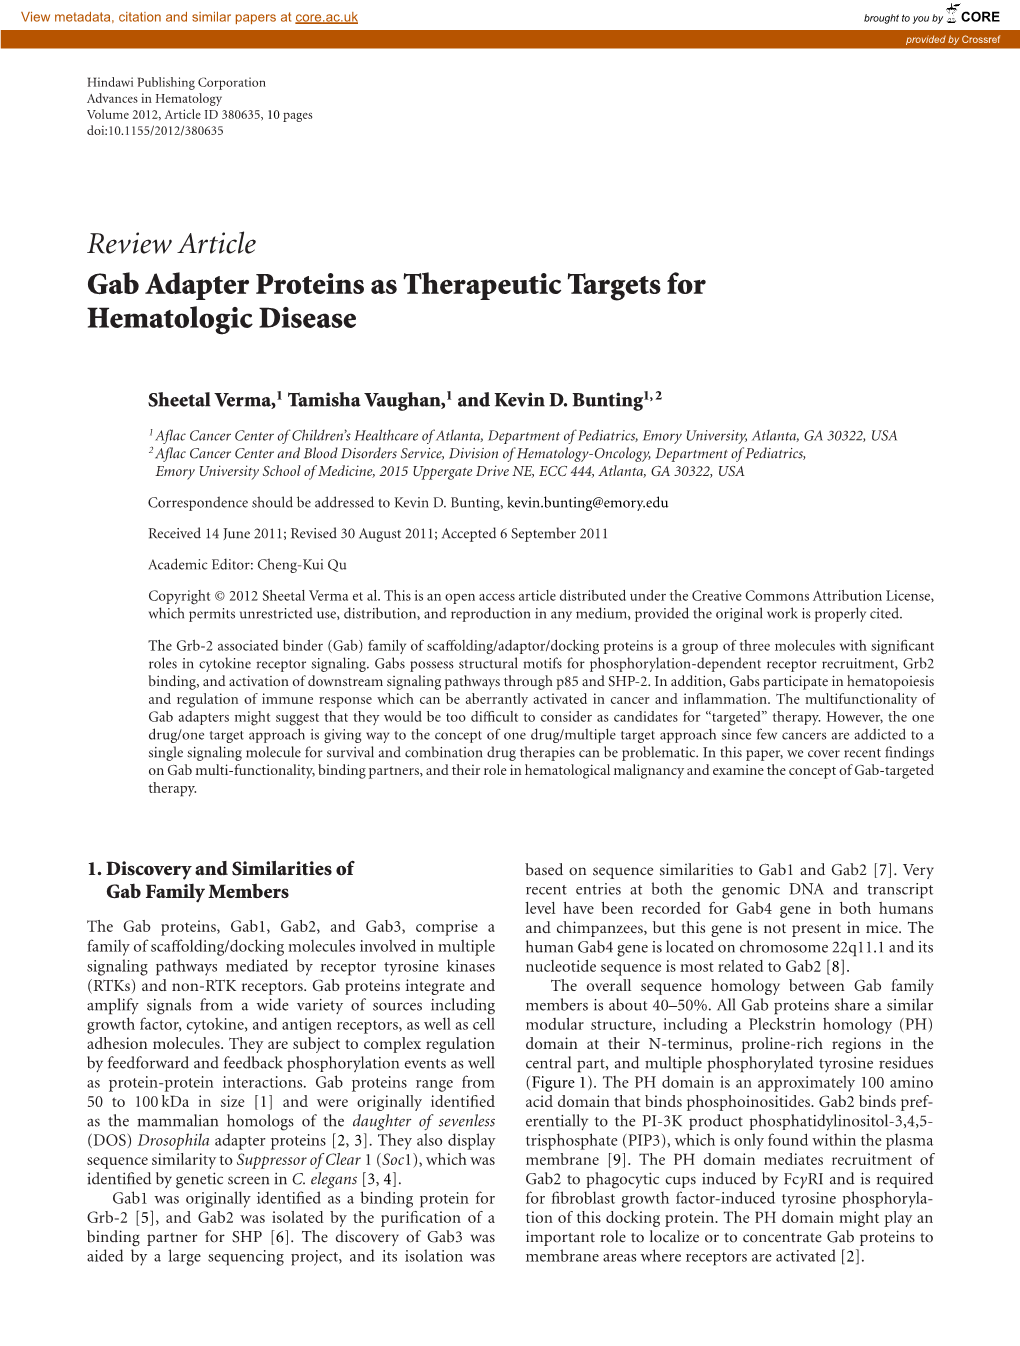 Review Article Gab Adapter Proteins As Therapeutic Targets for Hematologic Disease